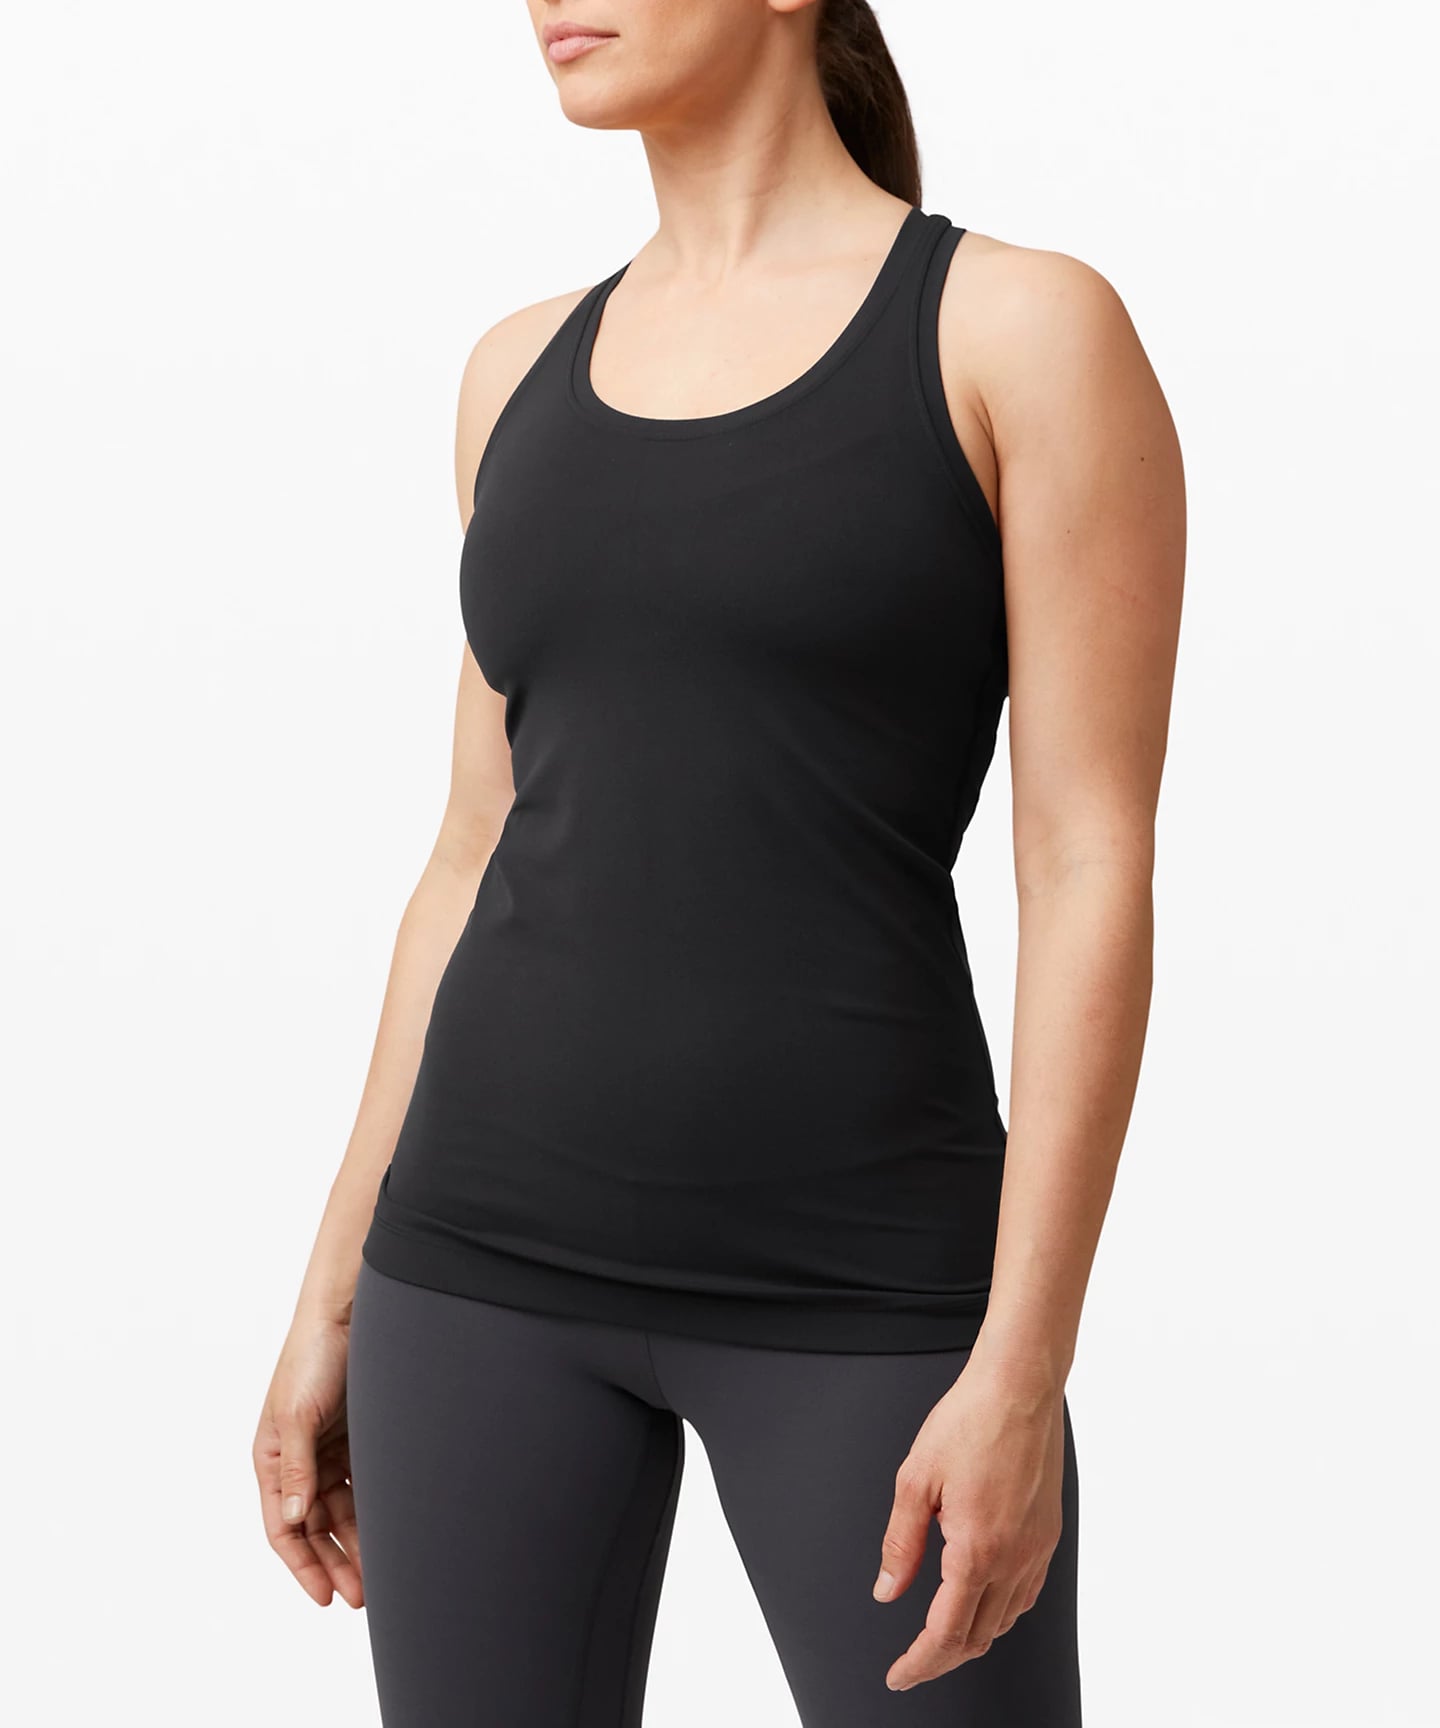 10 popular Lululemon styles under $50 for your next workout